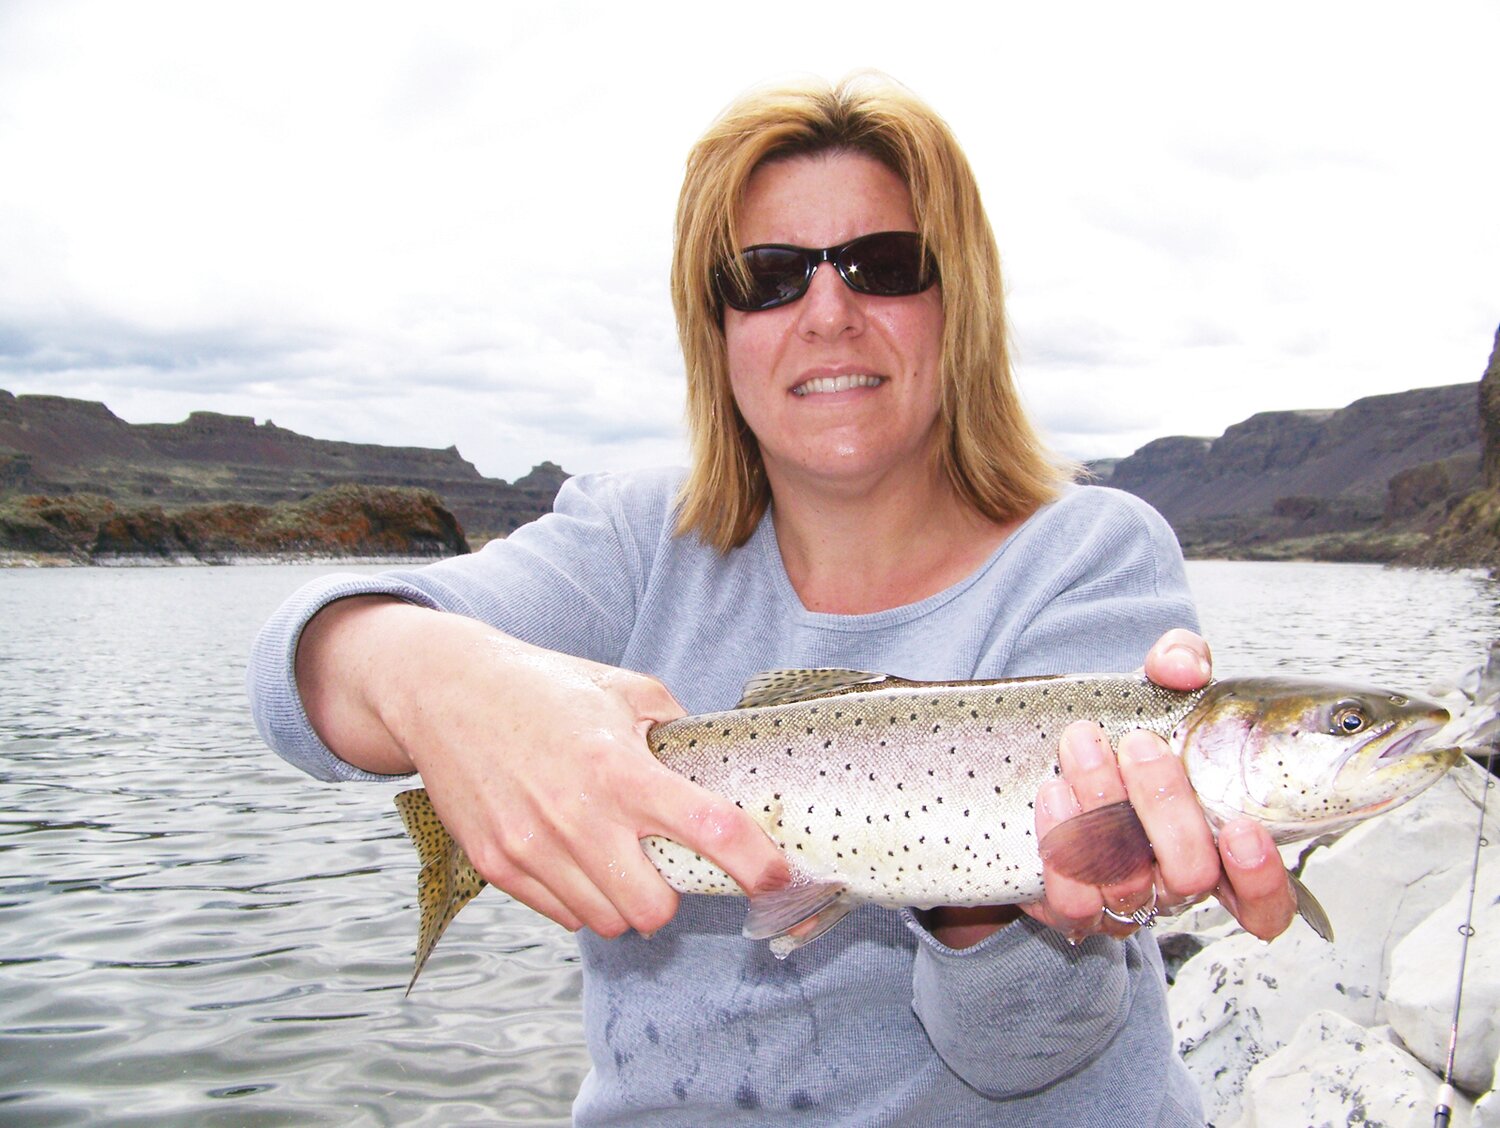 Michelle Kruse with a Lahontan Cutthroat trout at Lake Lenore.
Courtesy John Kruse